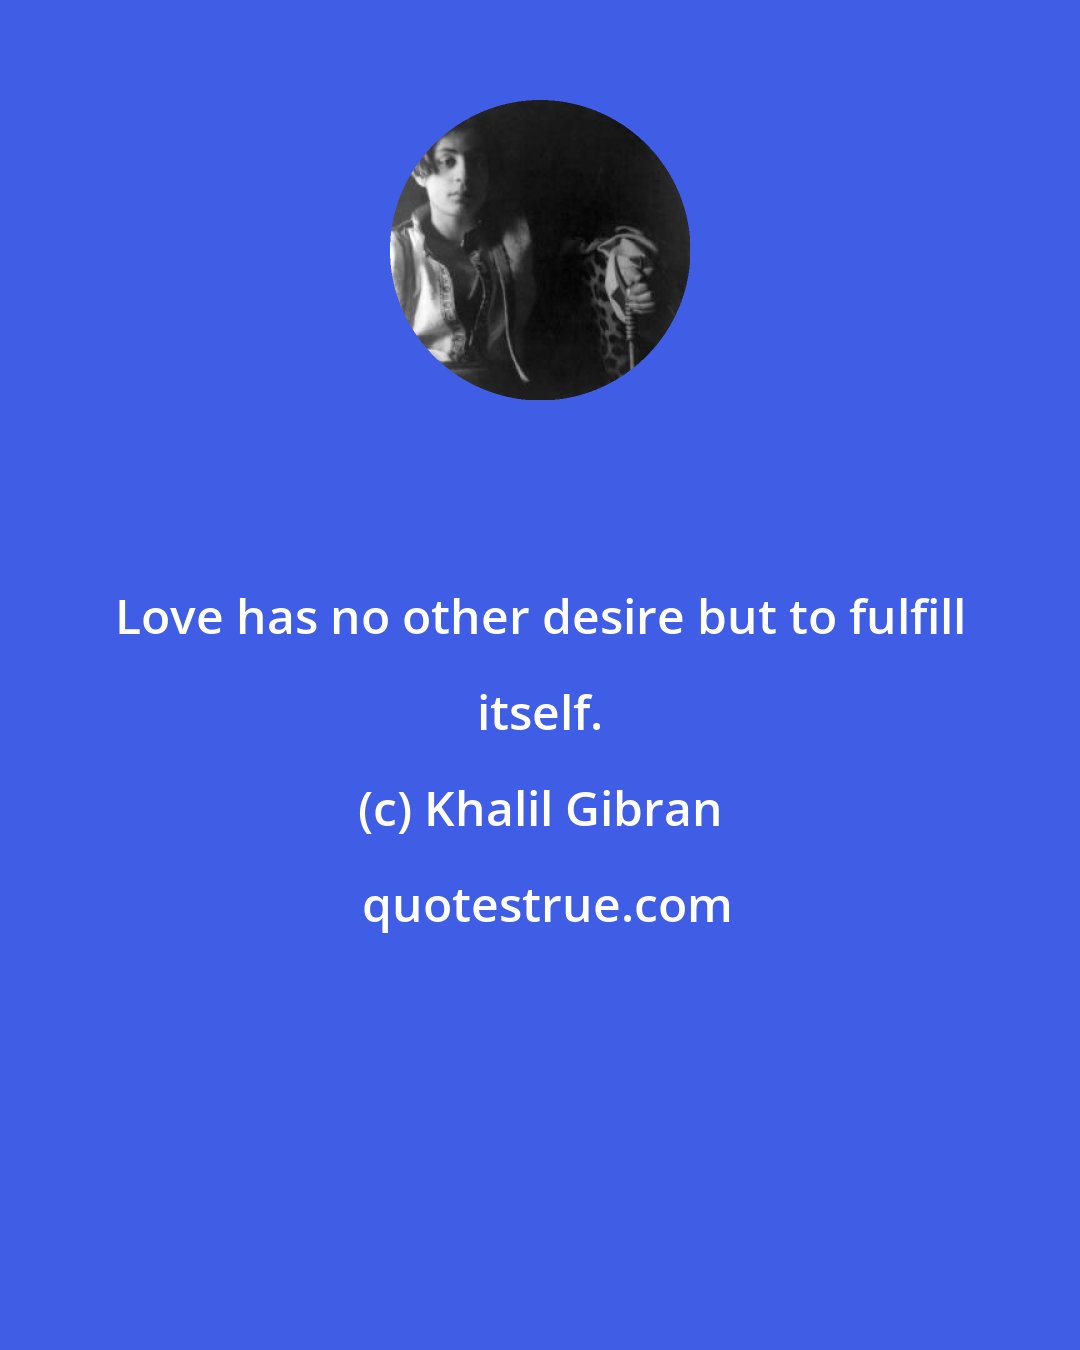 Khalil Gibran: Love has no other desire but to fulfill itself.